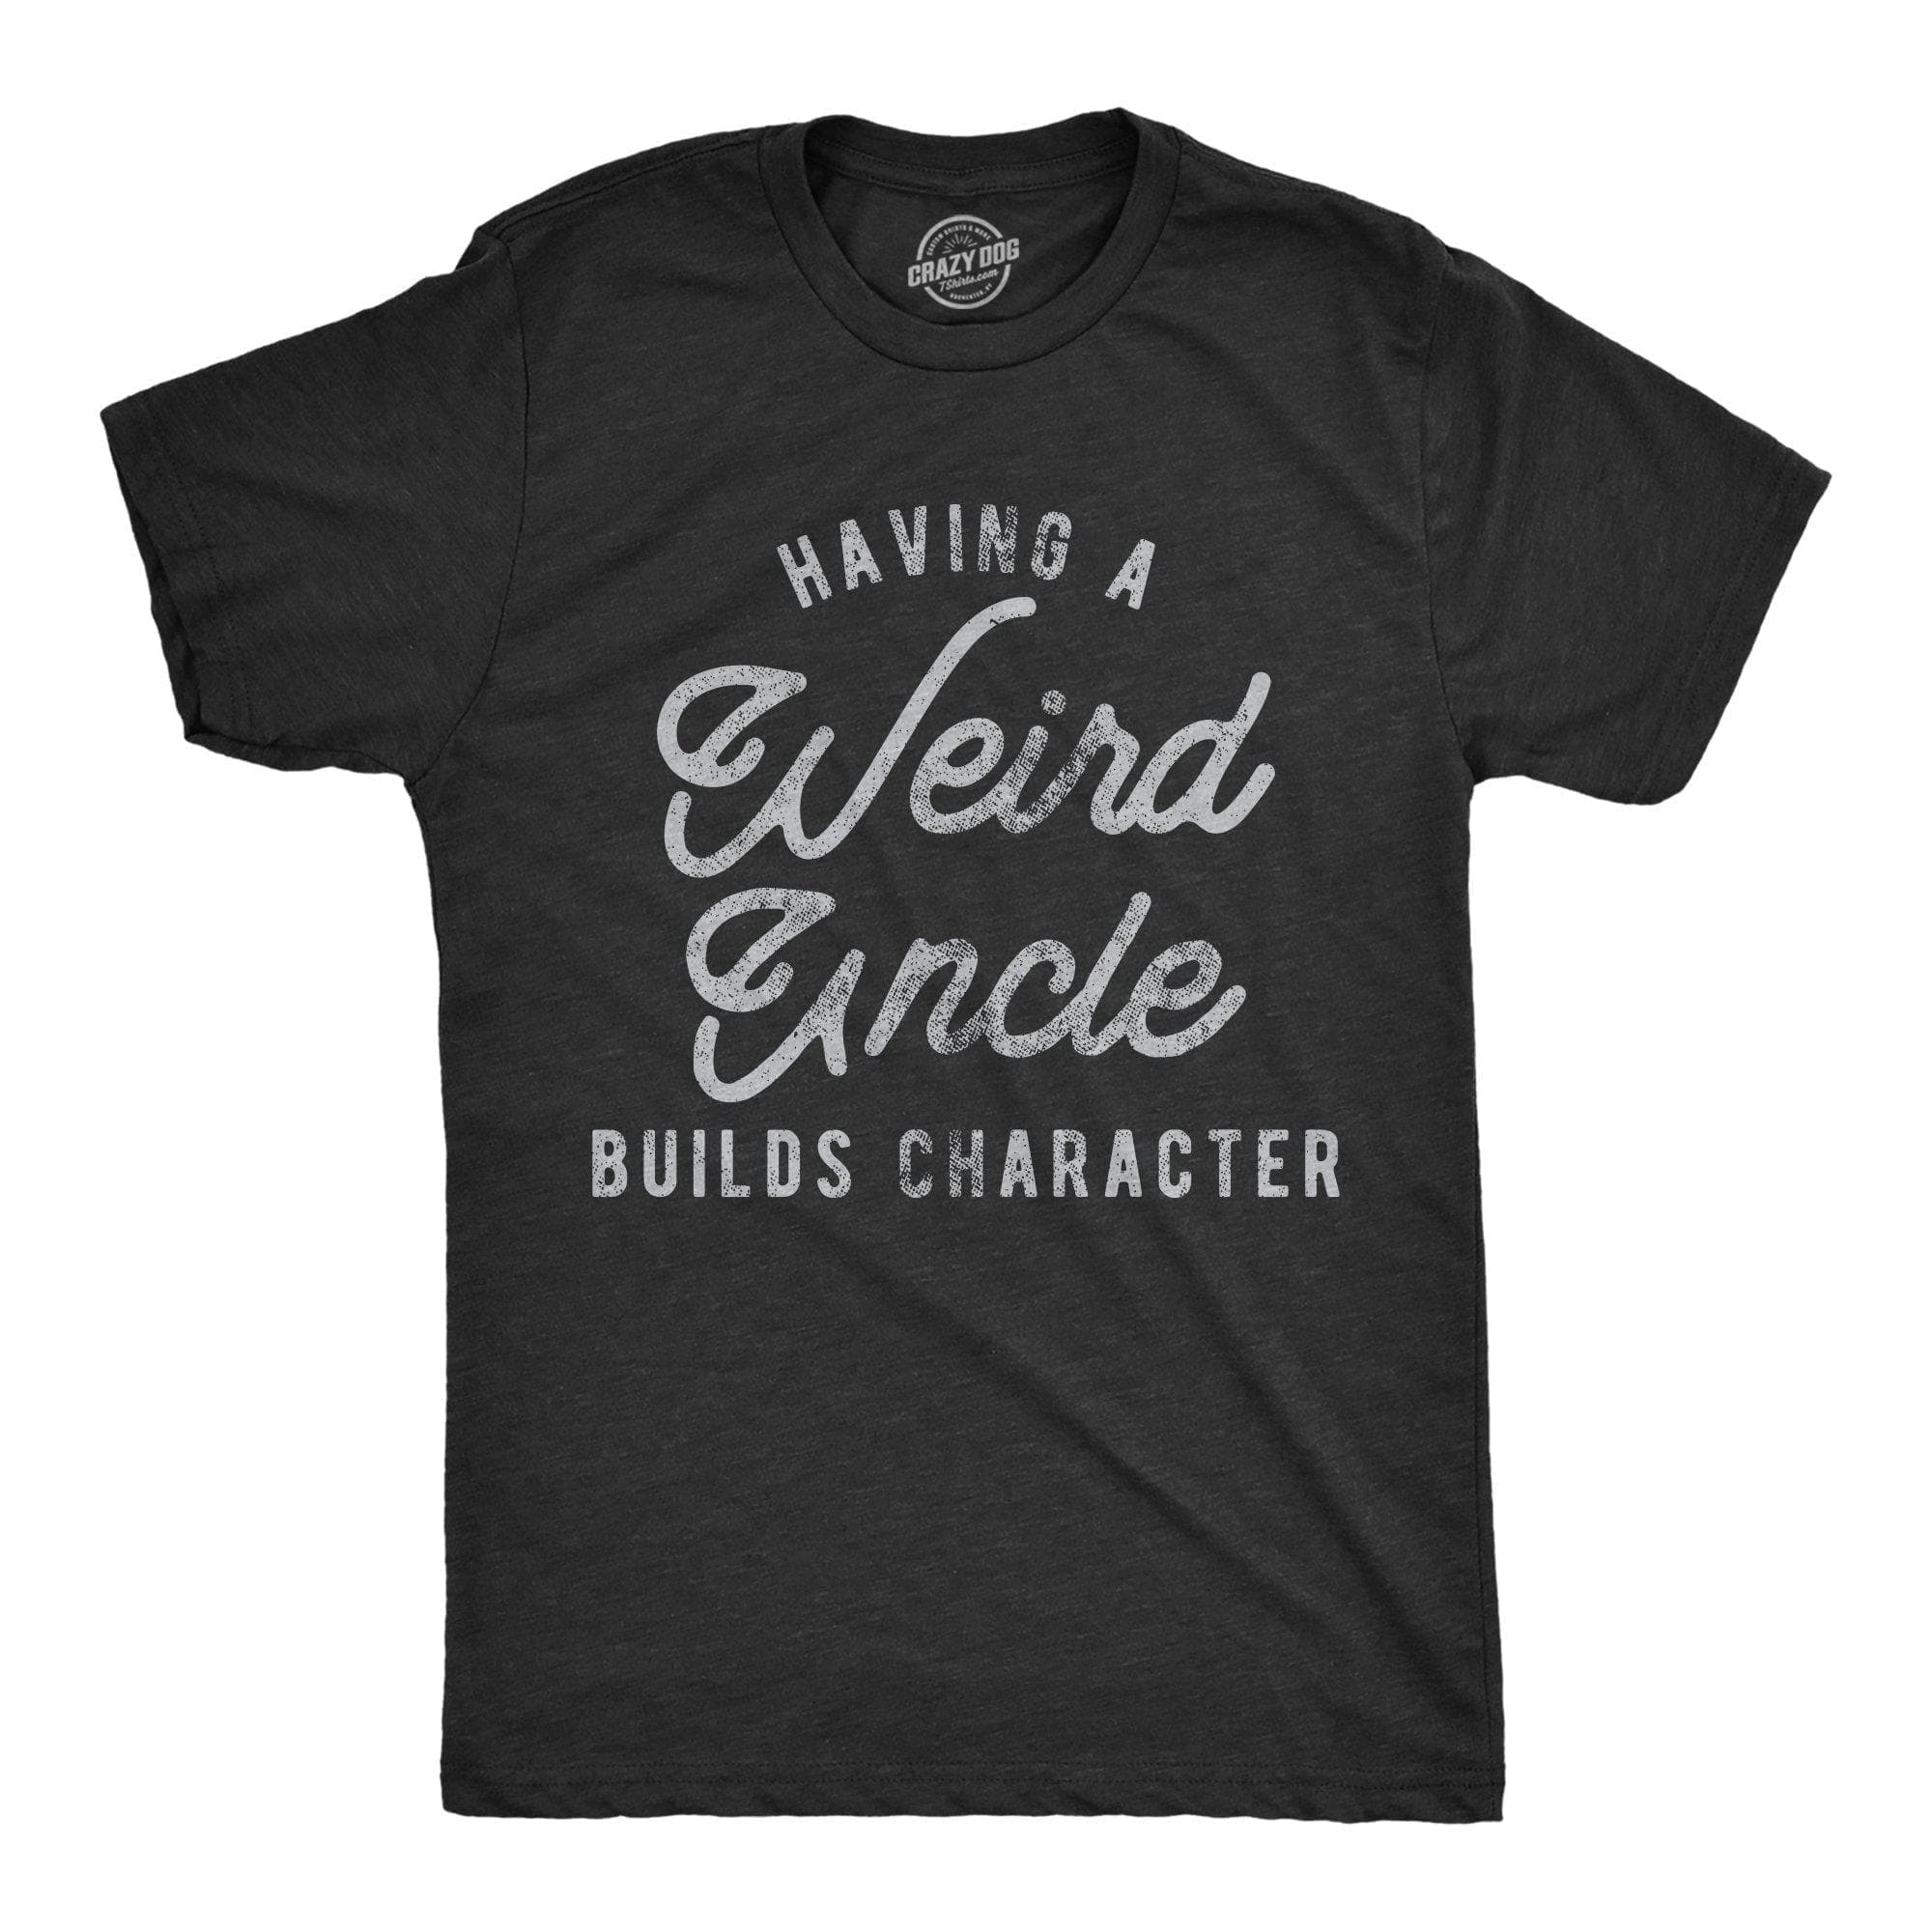 Having A Weird Uncle Builds Character Men's Tshirt - Crazy Dog T-Shirts